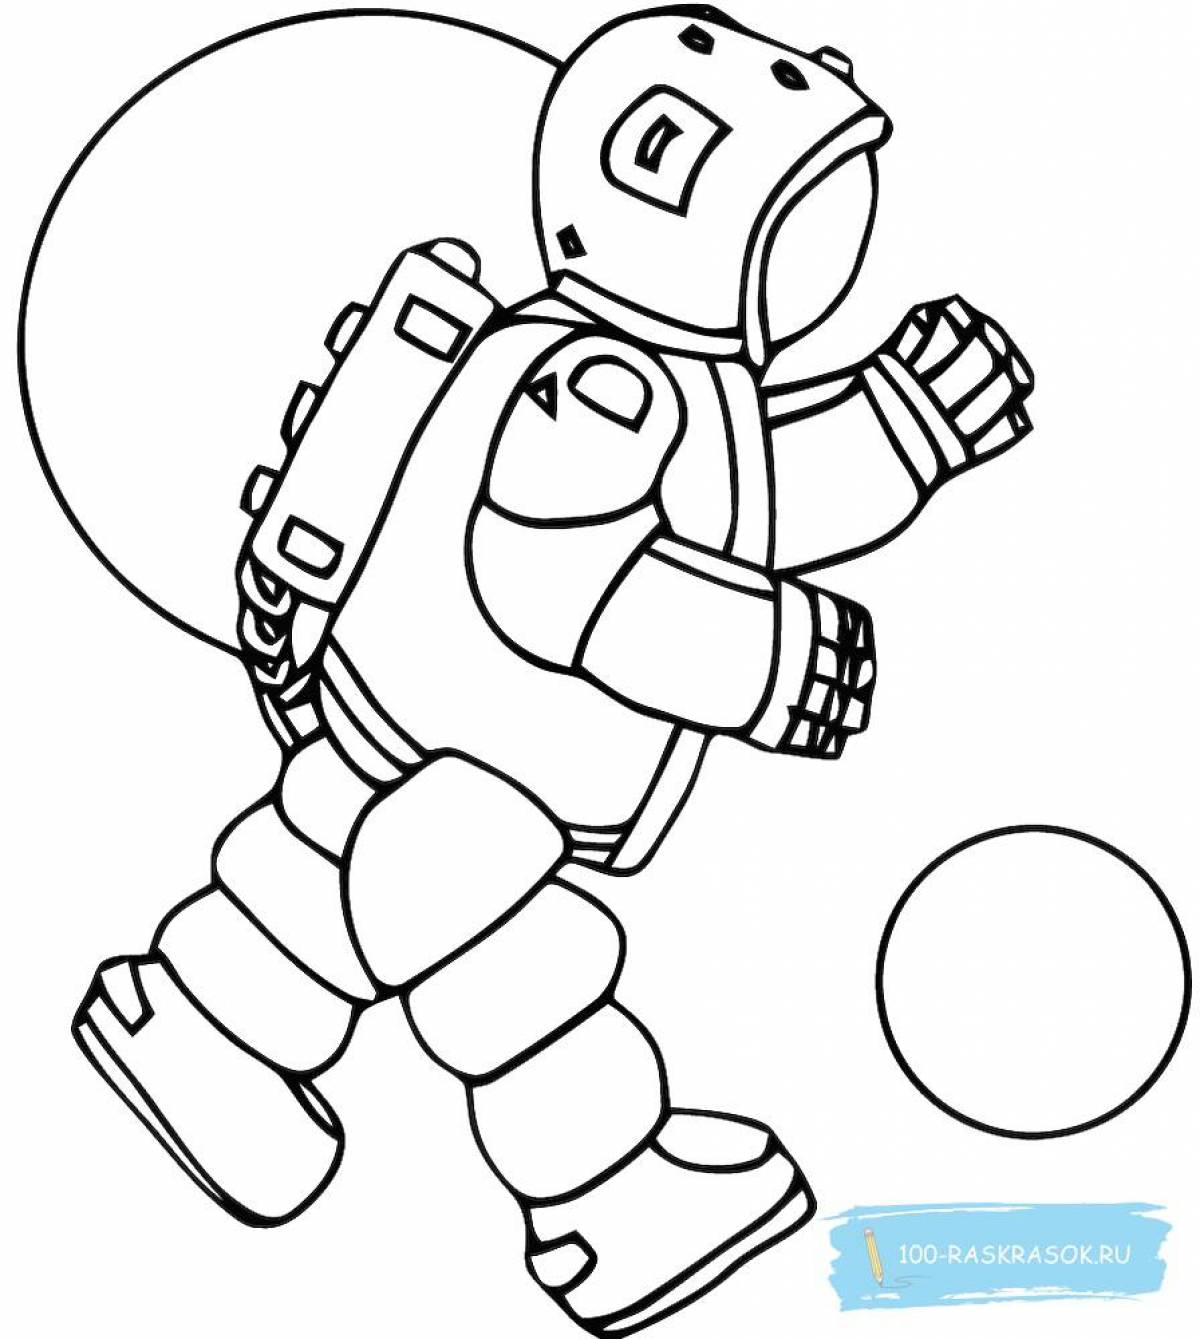 Astronaut Live Coloring Page